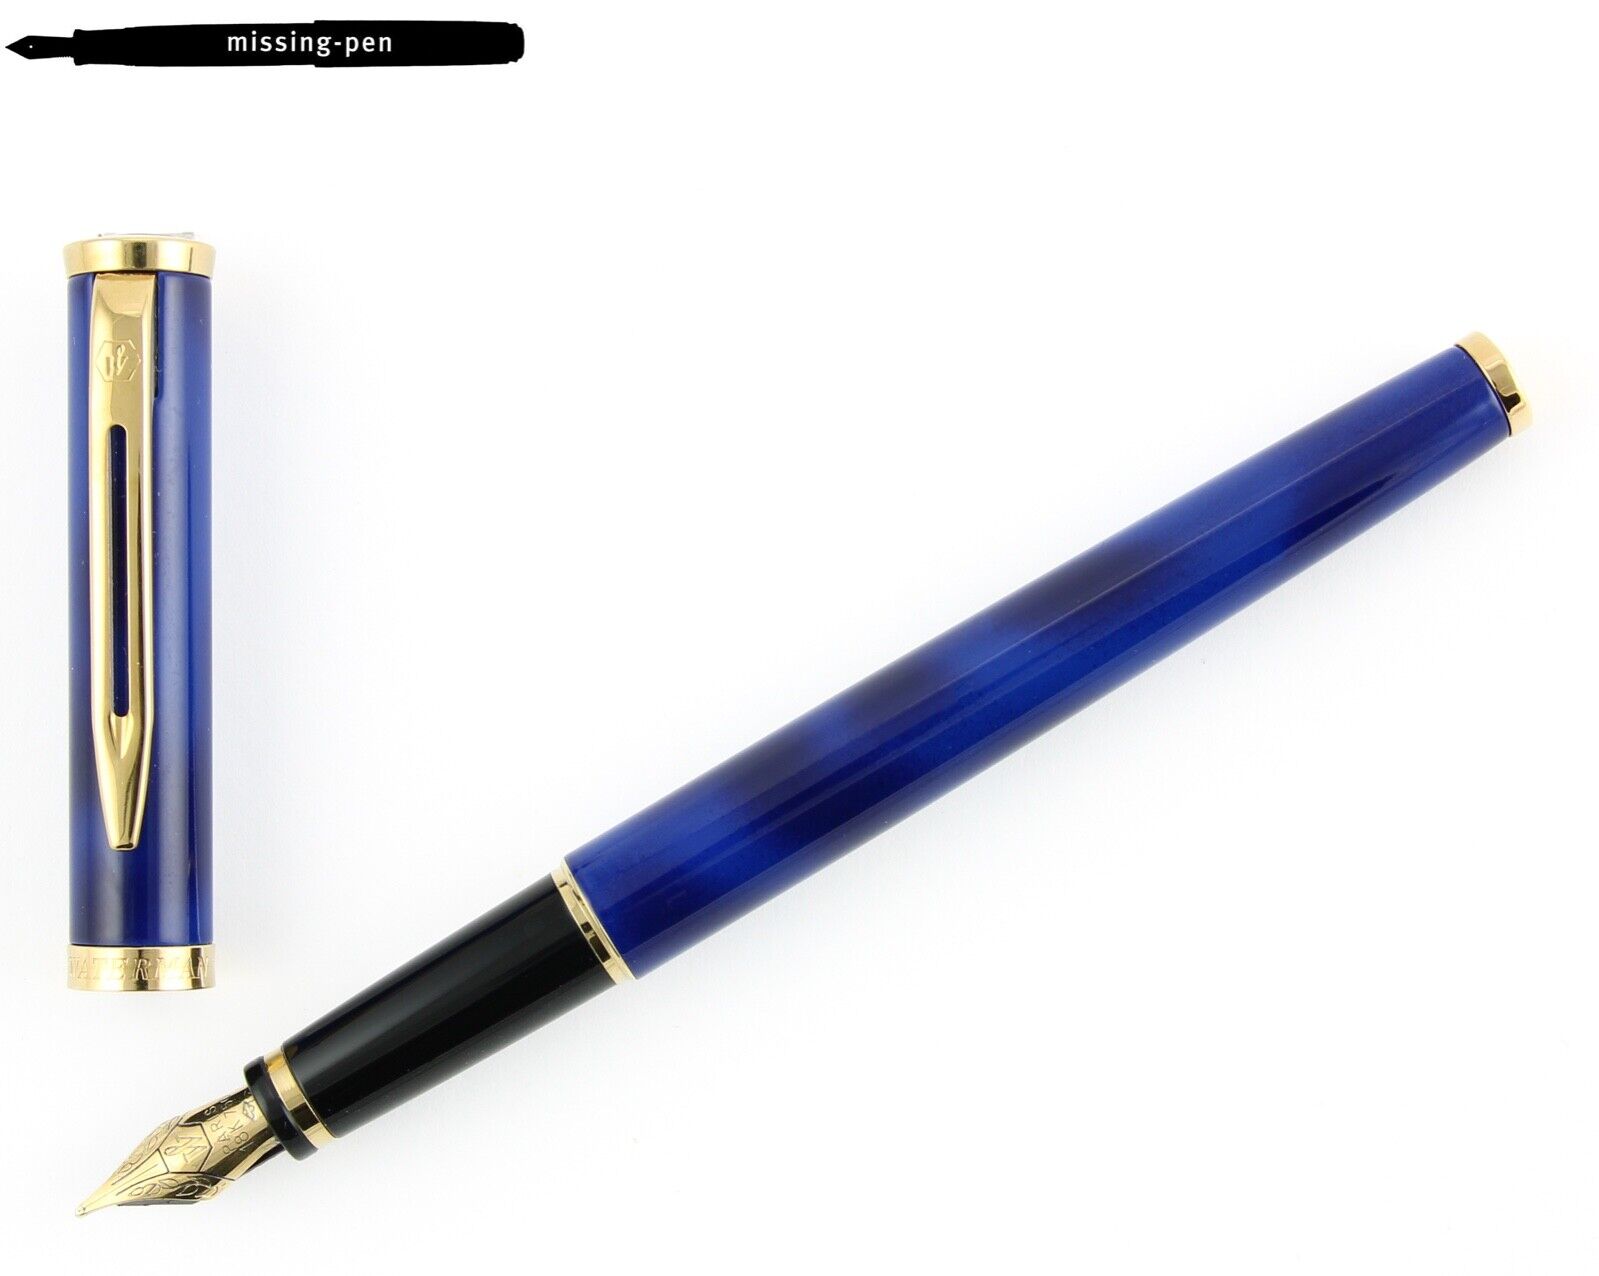 Waterman Preface Cartridges Fountain Pen in Blue-Marble Gold with 18K M or L-nib